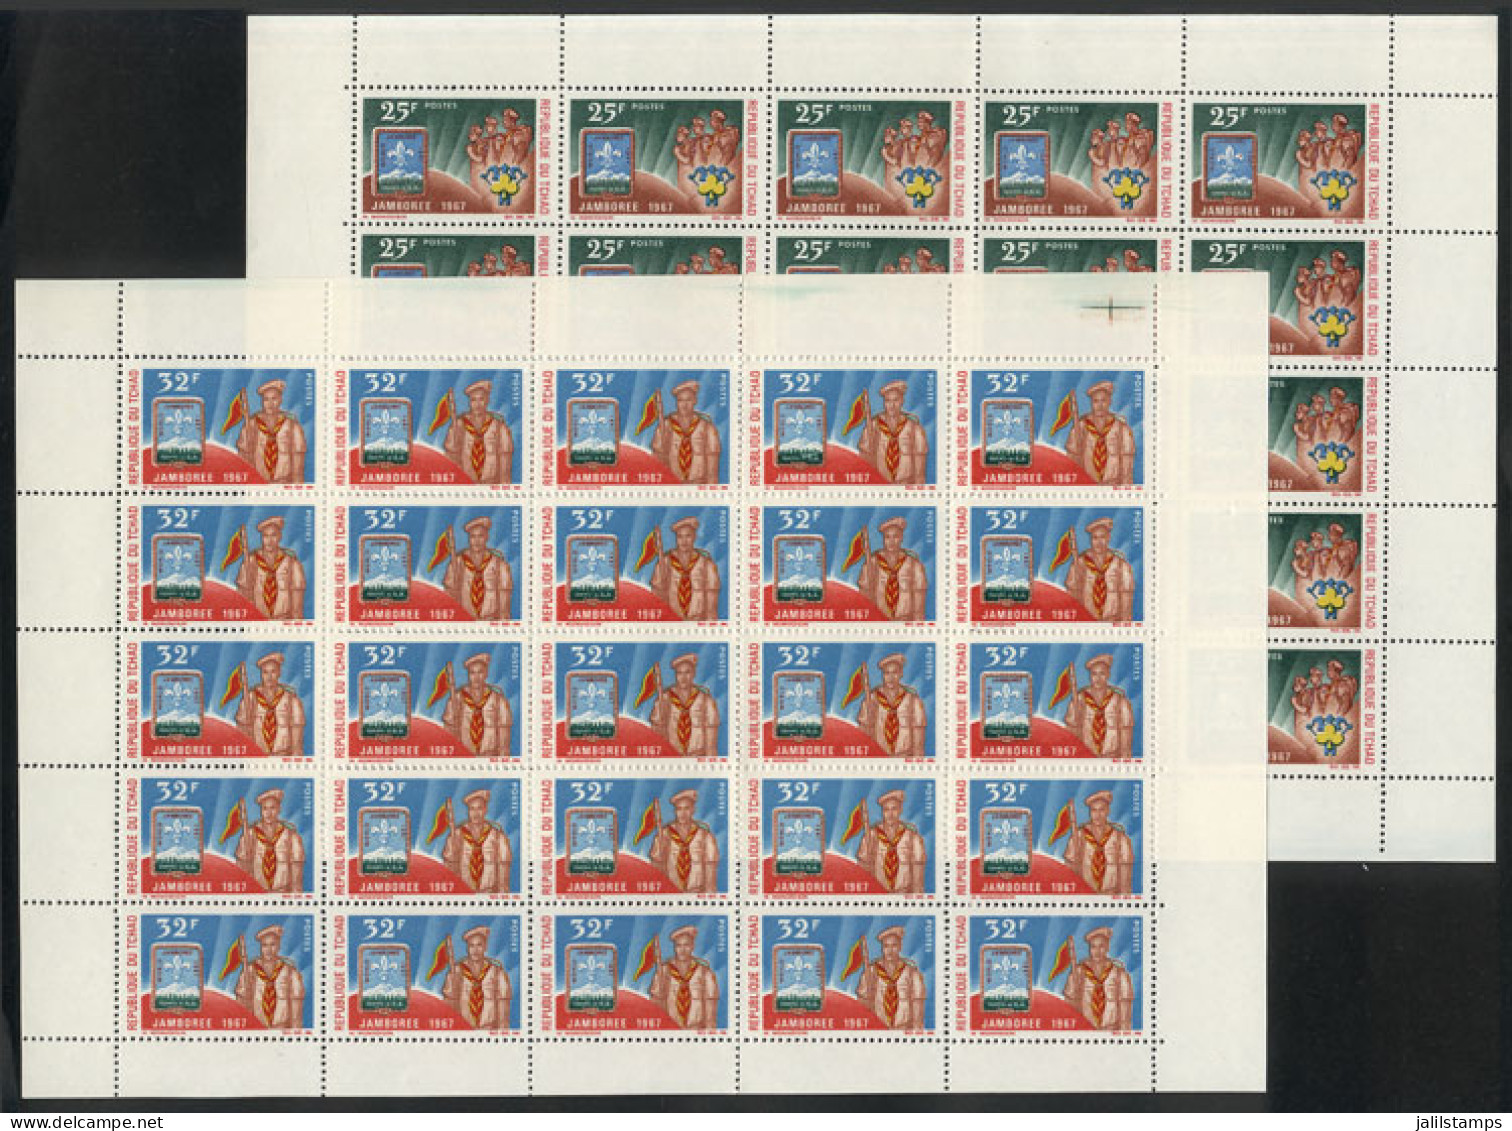 CHAD: Sc.144/145, 1967 Scouts, Cmpl. Set Of 2 Values In Sheets Of 25, MNH, VF Quality! - Tschad (1960-...)